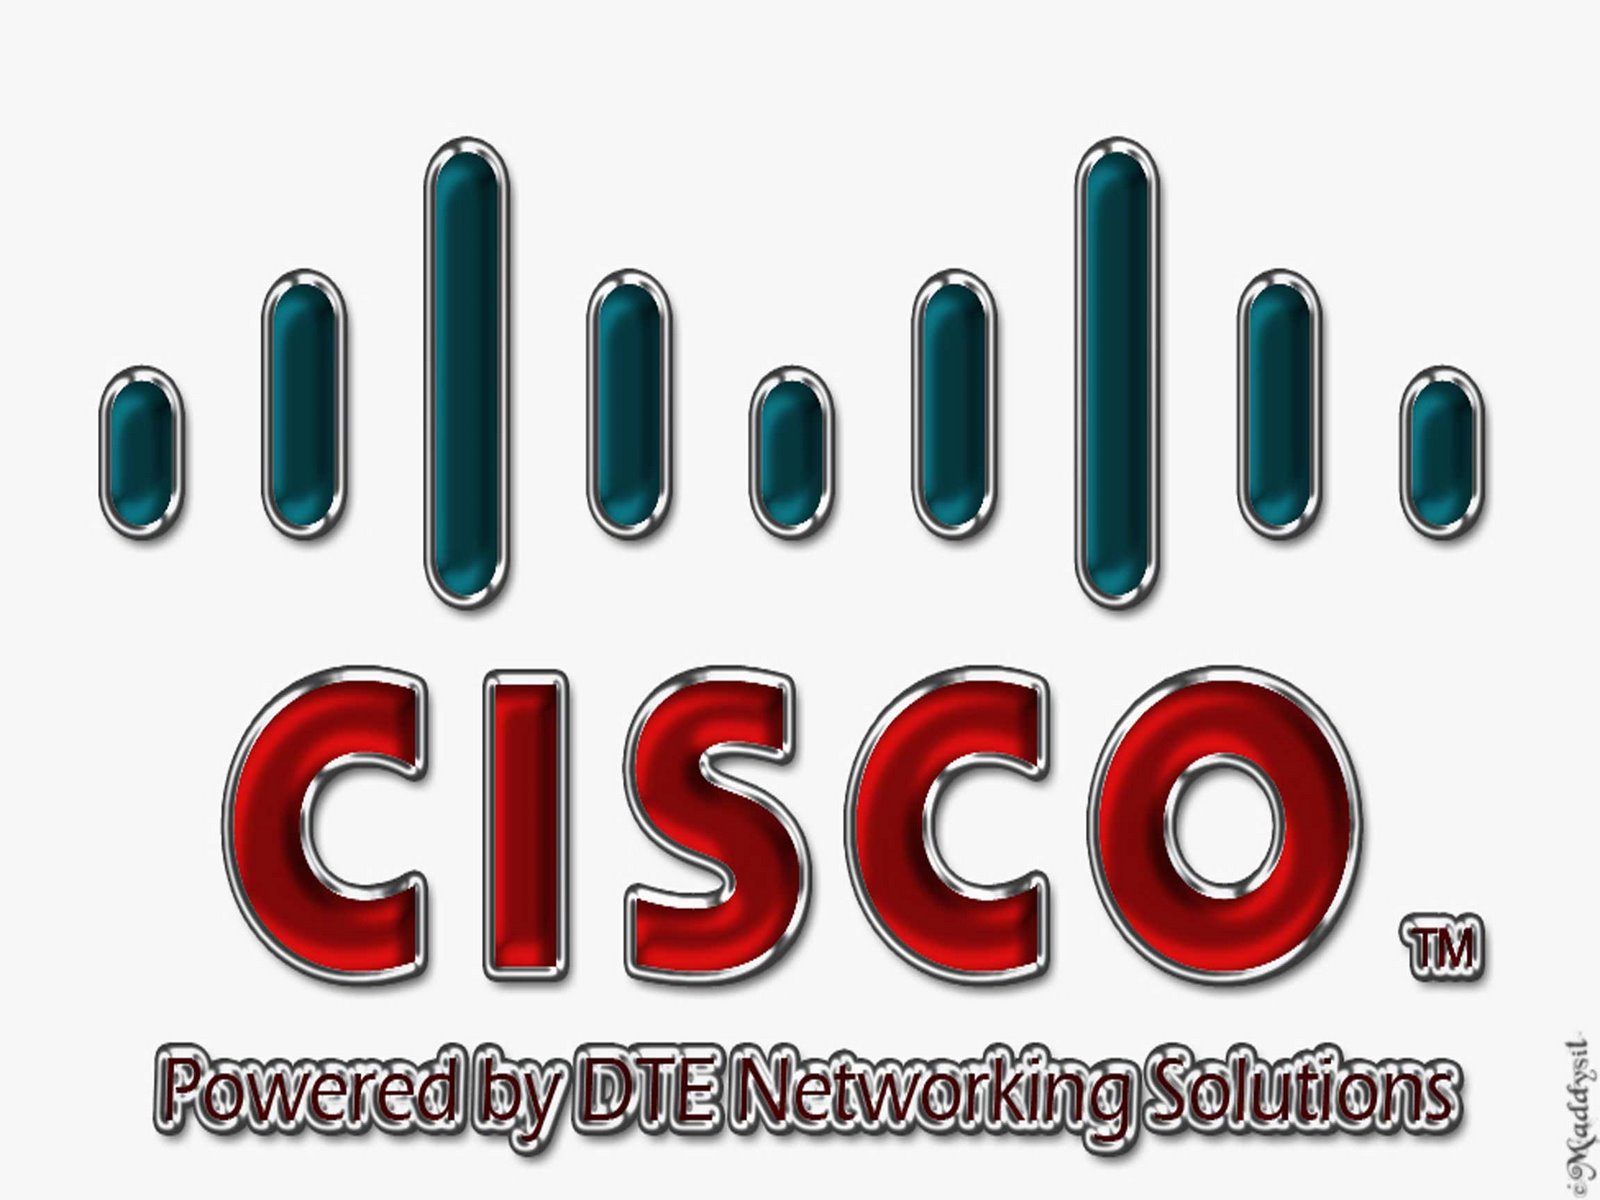 [CiscoSystems_by-sil10.jpg]